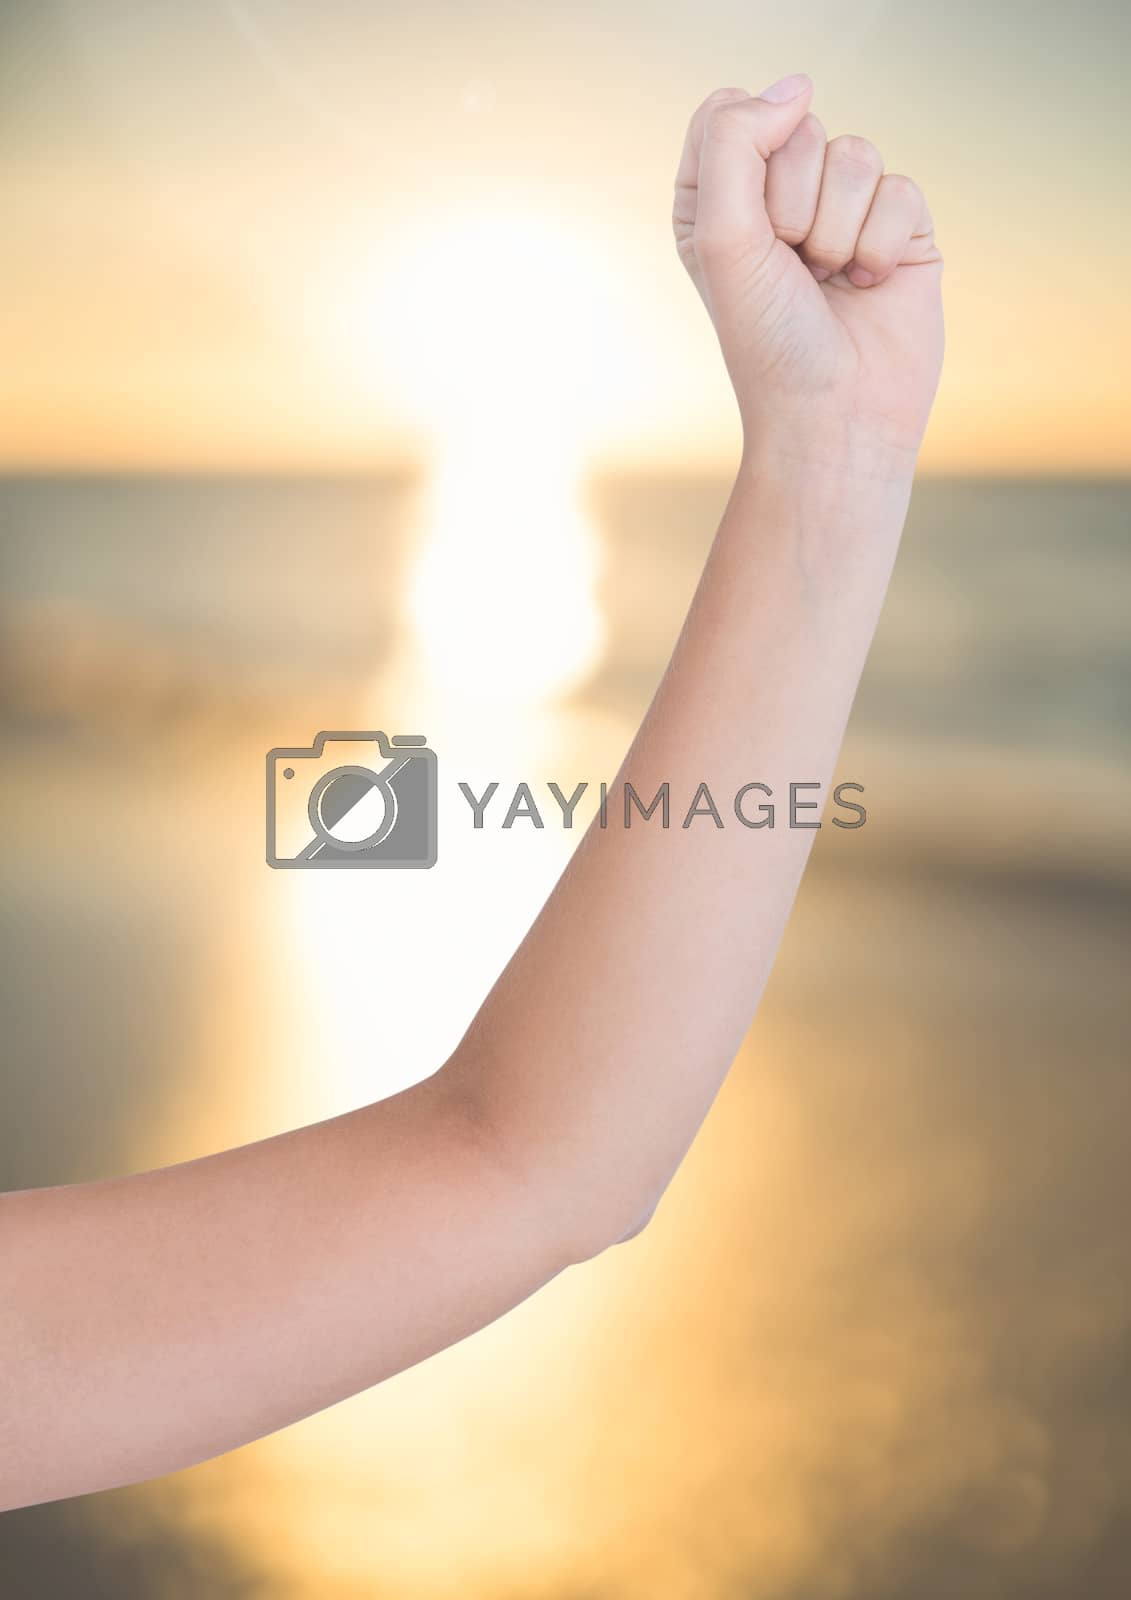 Royalty free image of Arm posing in front of tranquil sea sunset by Wavebreakmedia